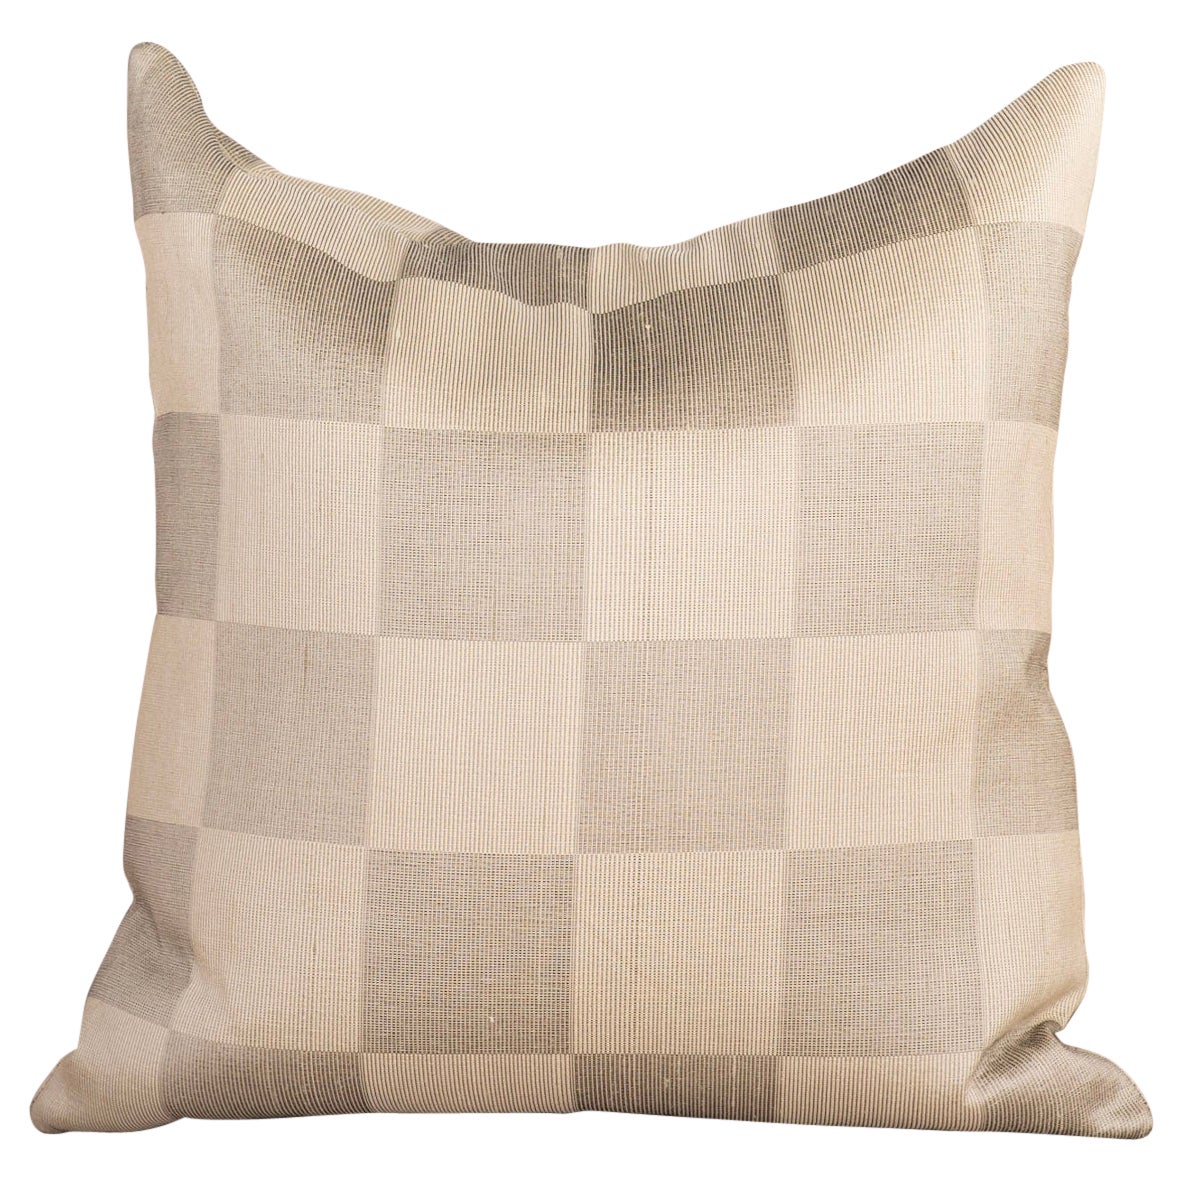 Textured Grey & Ivory Checkered Pillow